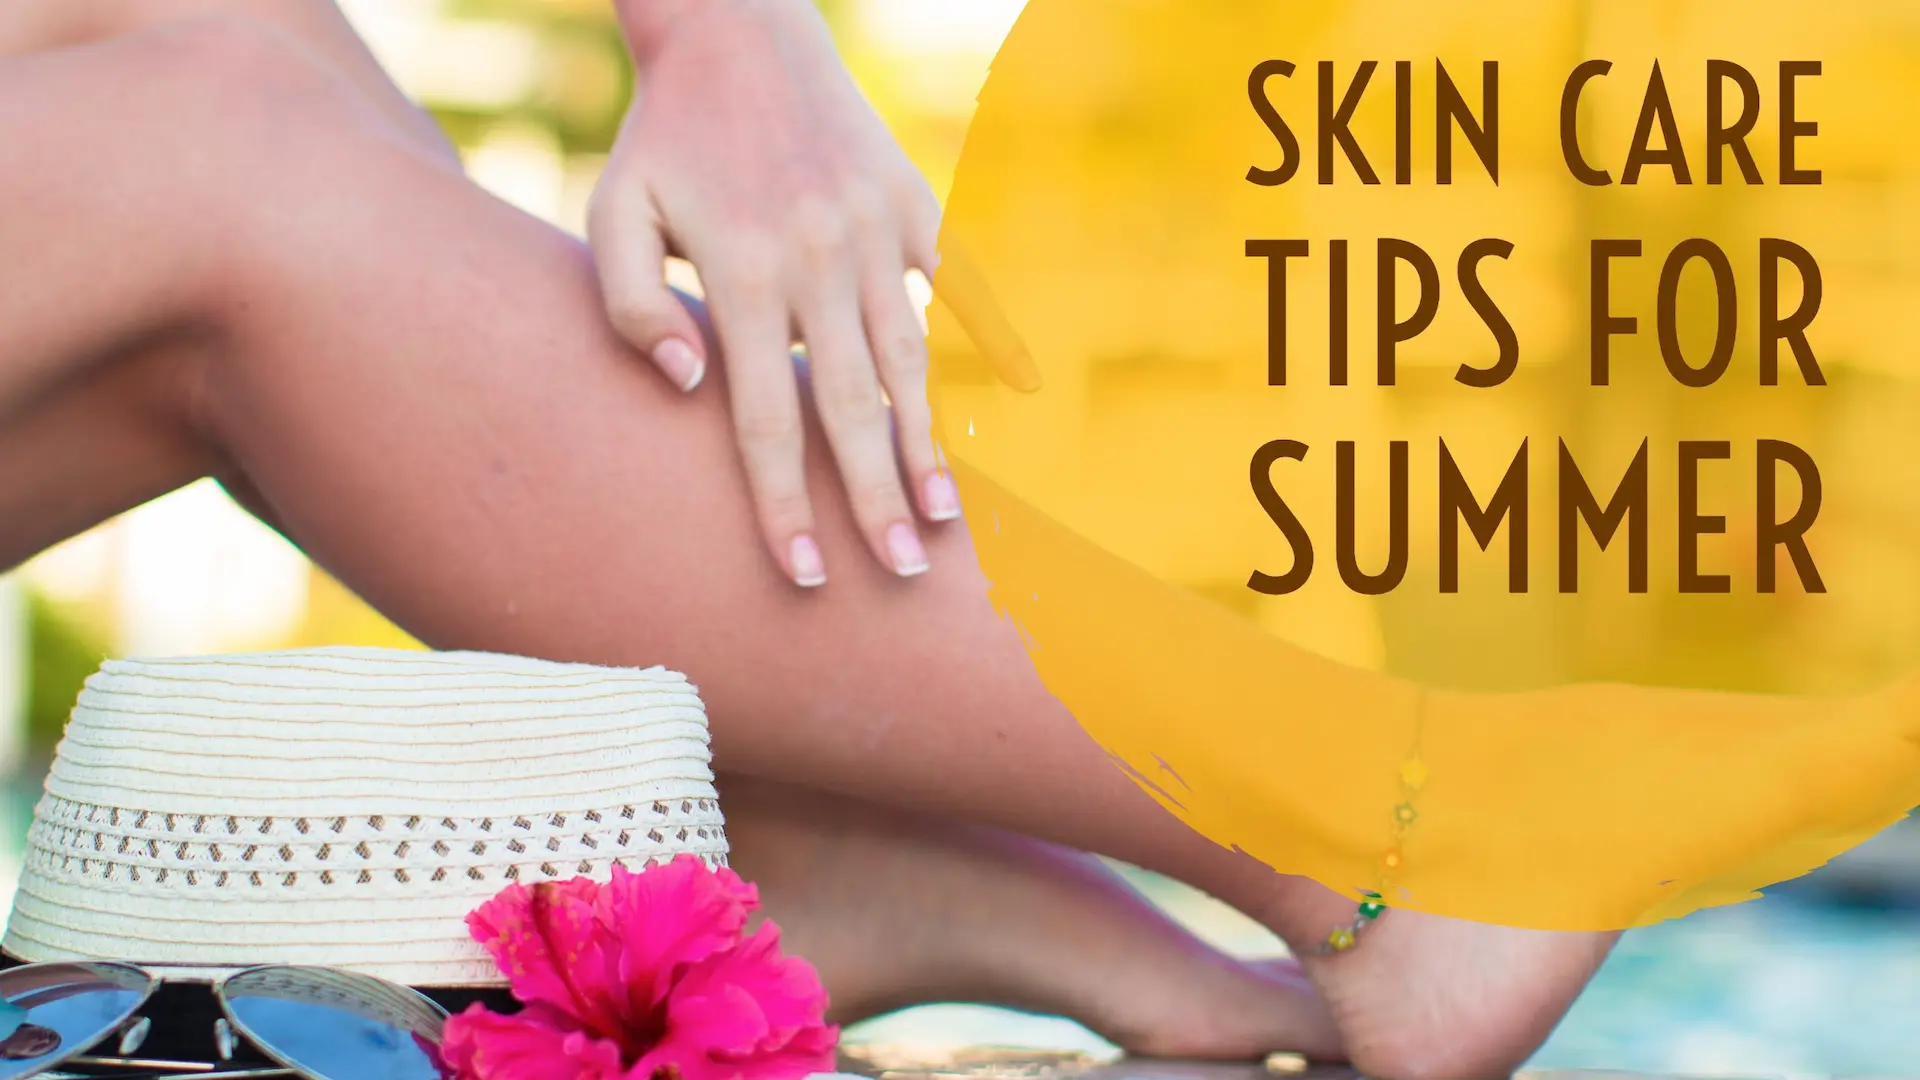 Woman putting suncream on her legs with text "skin care tips for summer" next to it